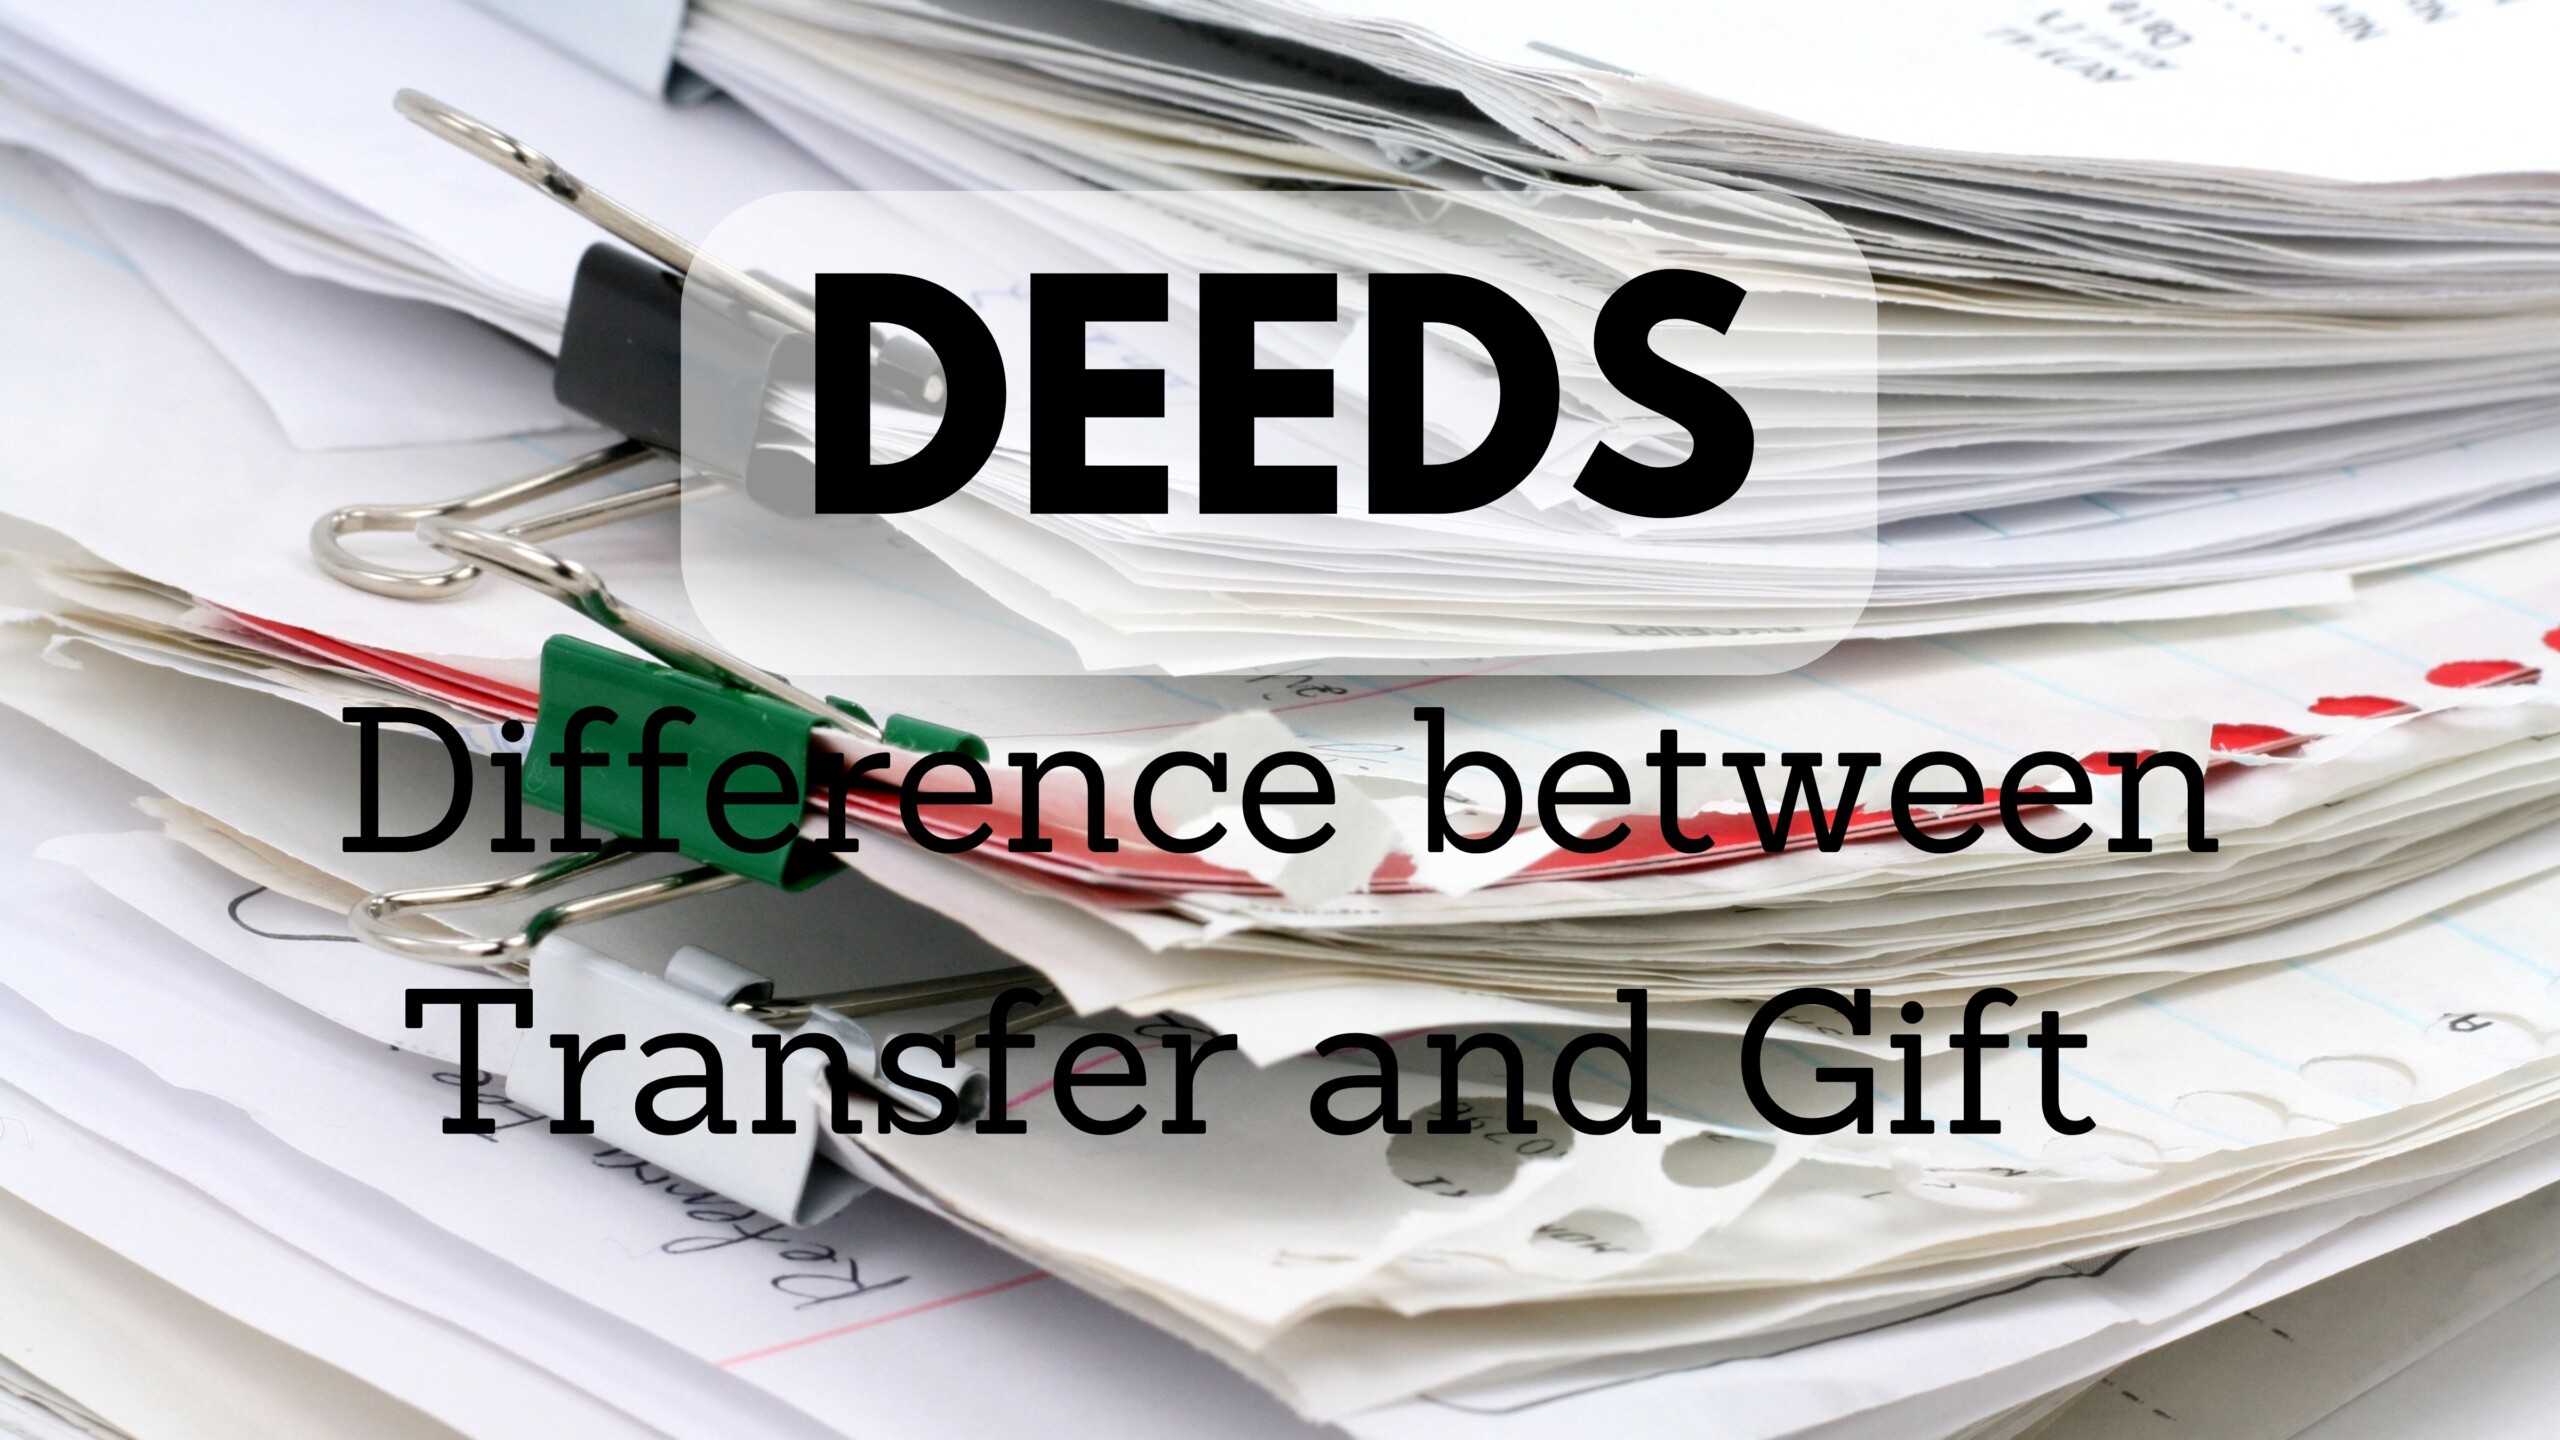 Gift Deed Registration - Essential Clauses, Documents - Corpbiz